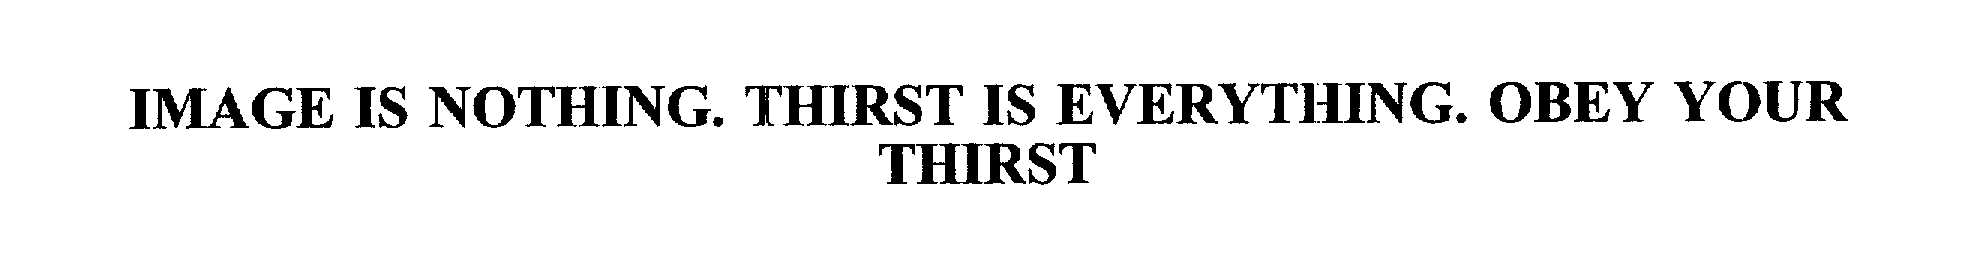  IMAGE IS NOTHING. THIRST IS EVERYTHING. OBEY YOUR THIRST